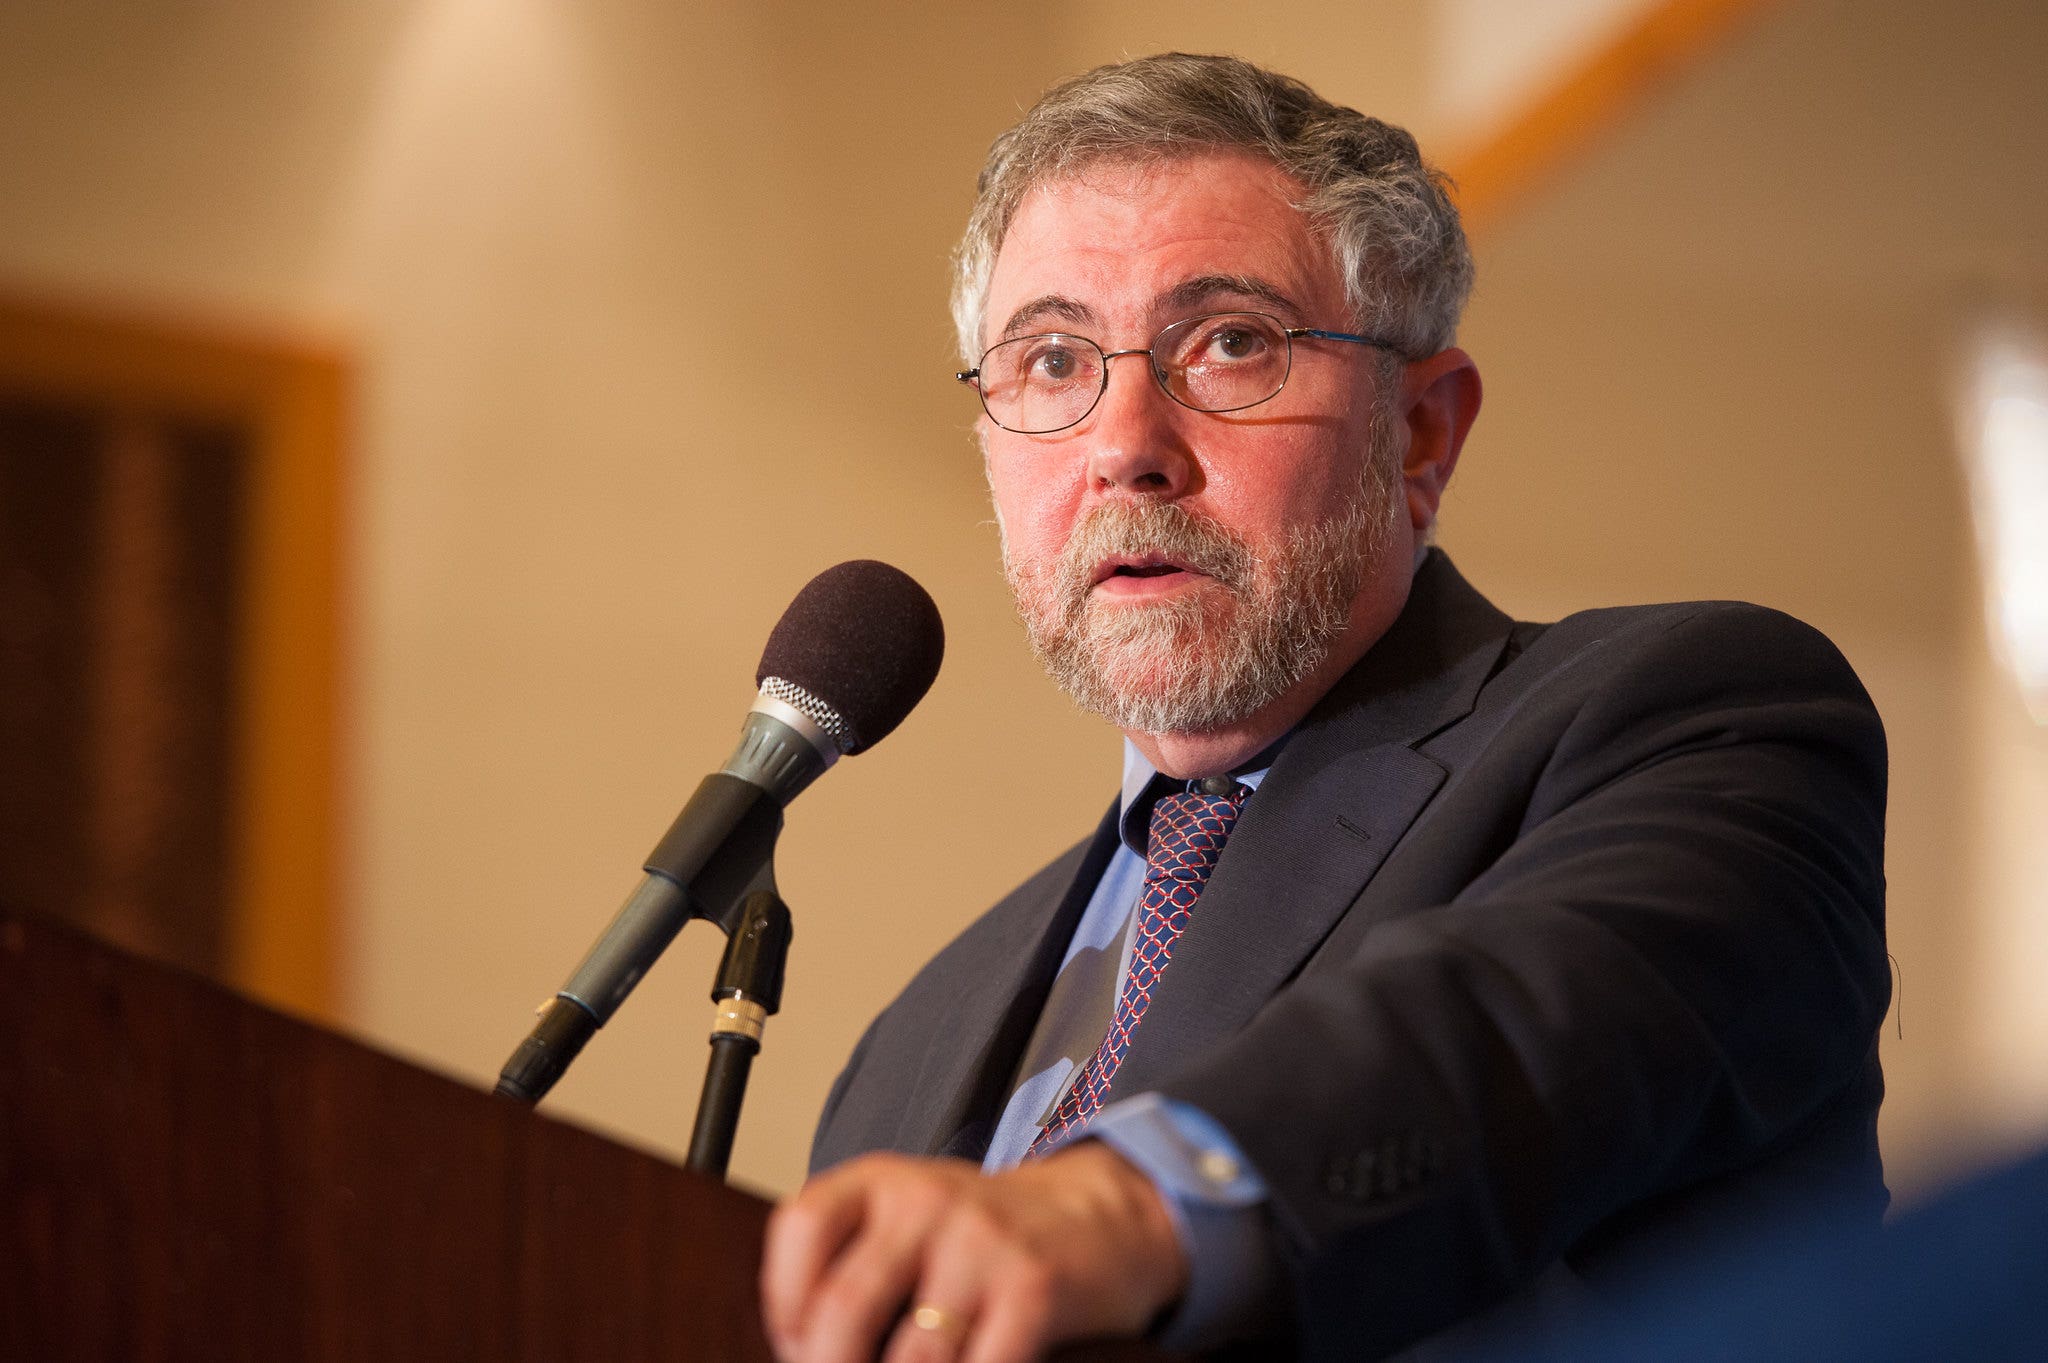 Why Paul Krugman Says Media May Have Missed The 'Pretty Good Reality' Of Economy Under Joe Biden